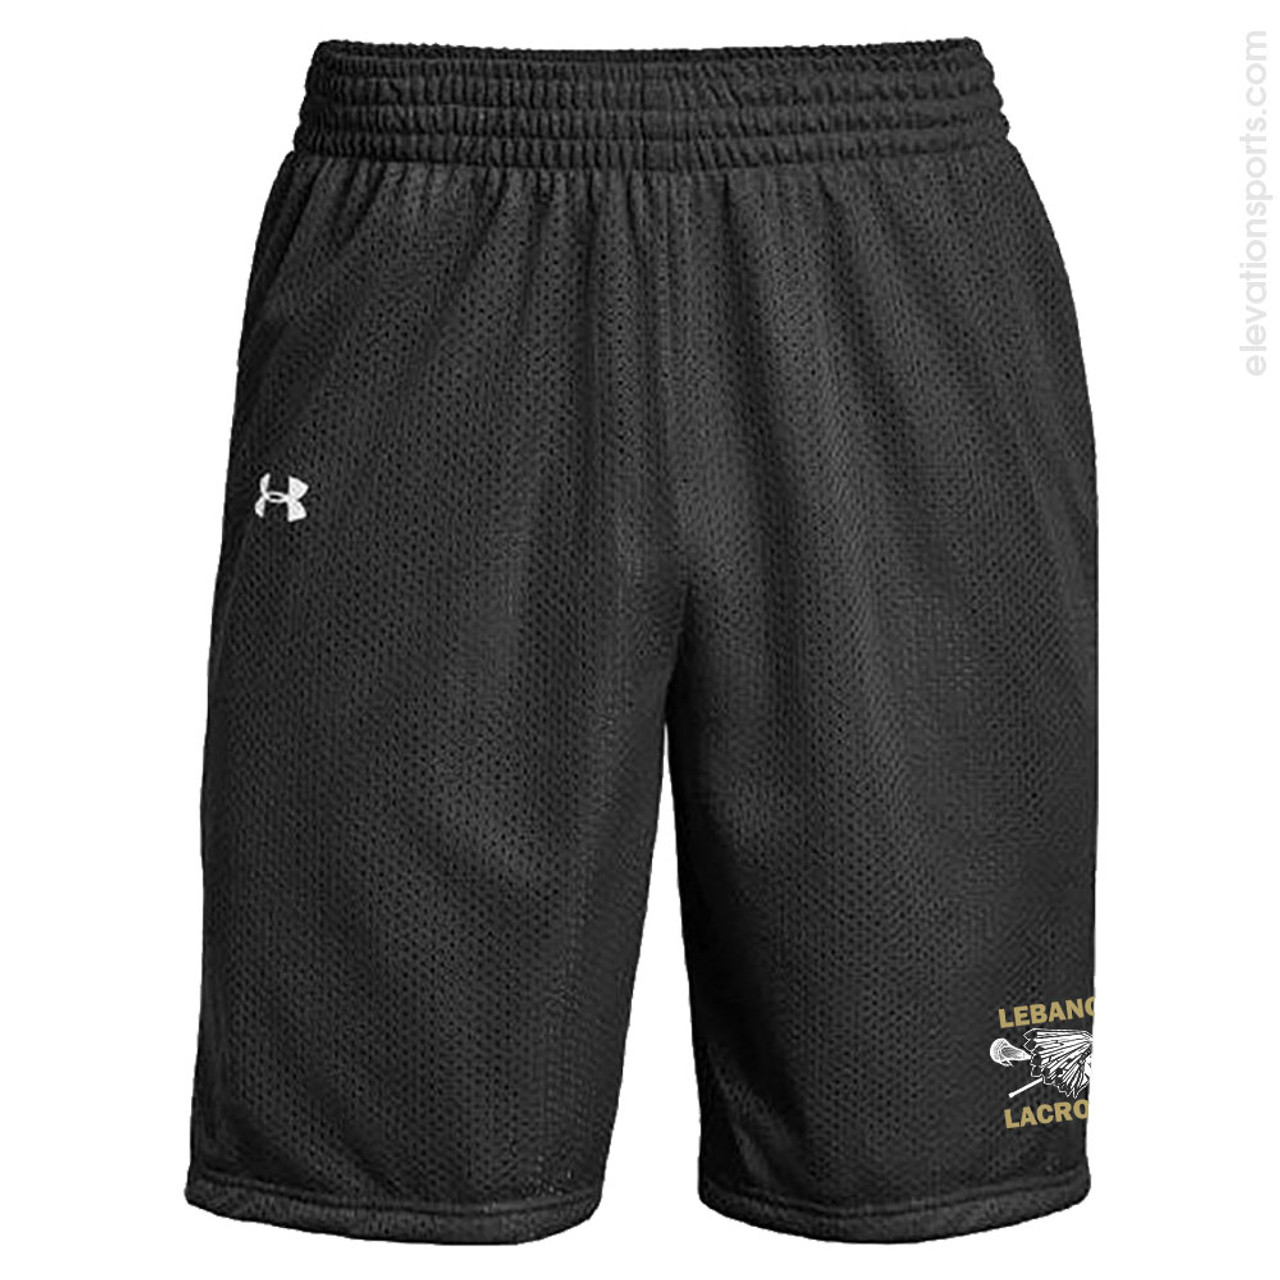 Under Armour Reversible Basketball Shorts, Adult 10 Inseam  (Red,Royal,Black))